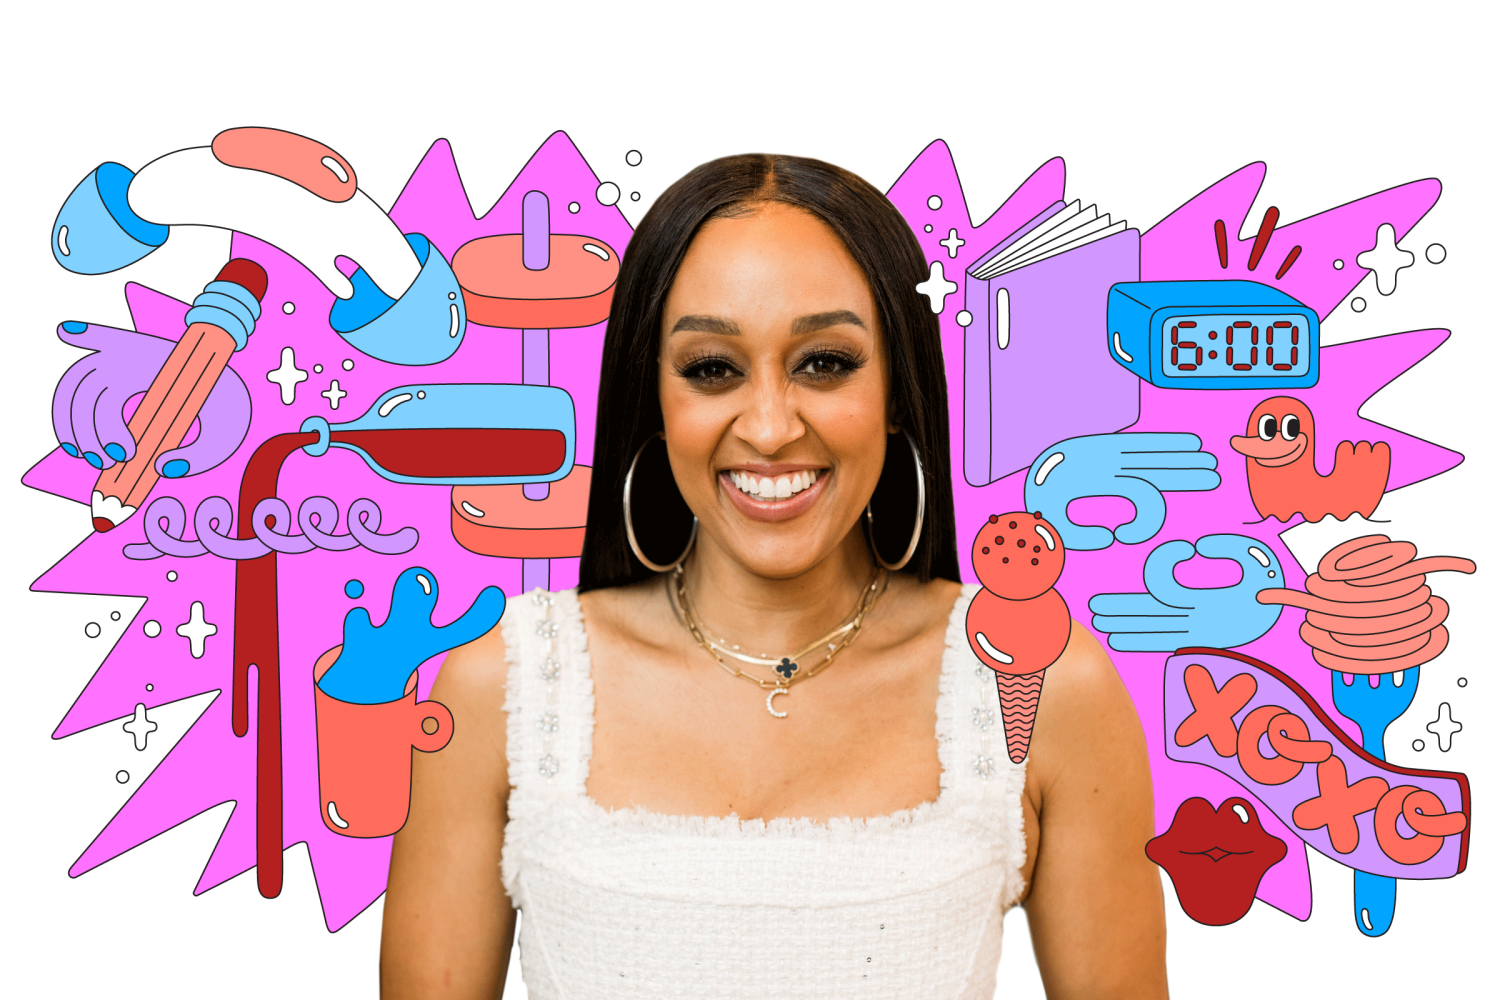 How to have the best Sunday in L.A., according to Tia Mowry